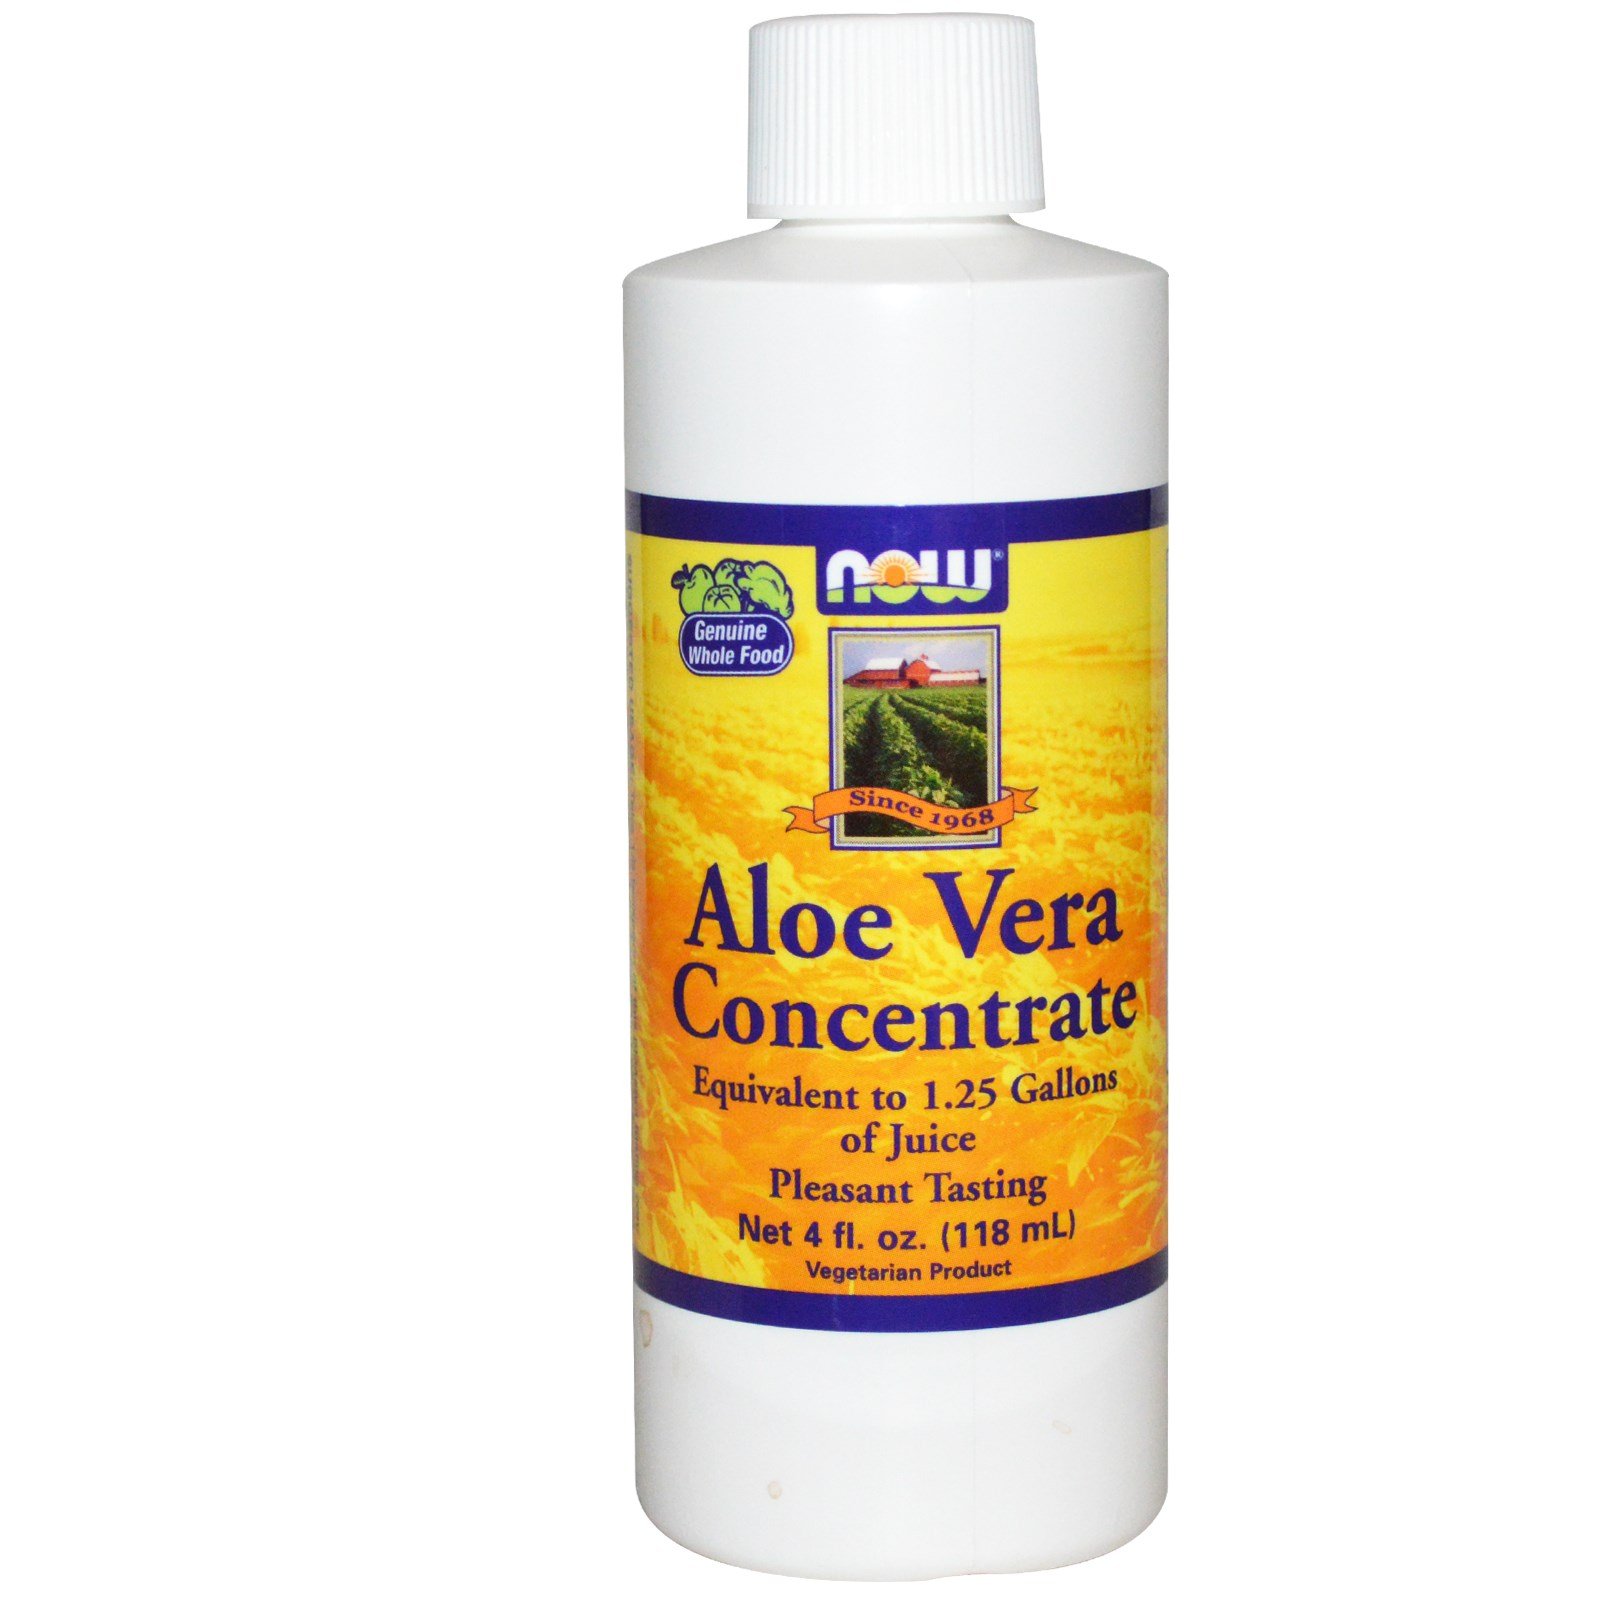 Aloe Vera Concentrate, 118 ml, Now. Special supplements. 